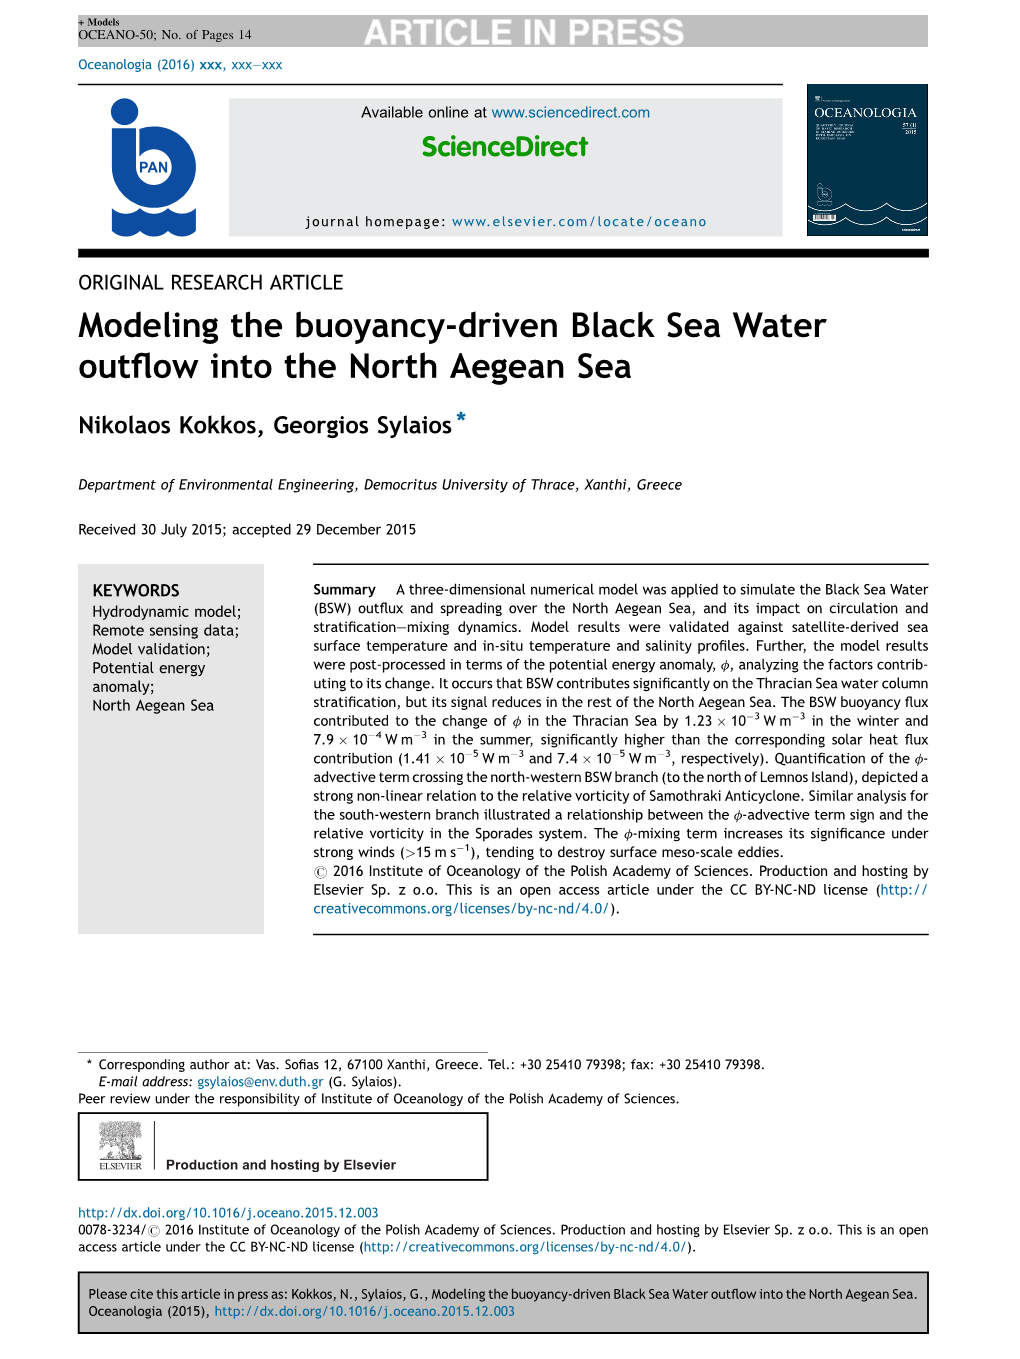 Modeling the Buoyancy-Driven Black Sea Water Outflow Into the North Aegean